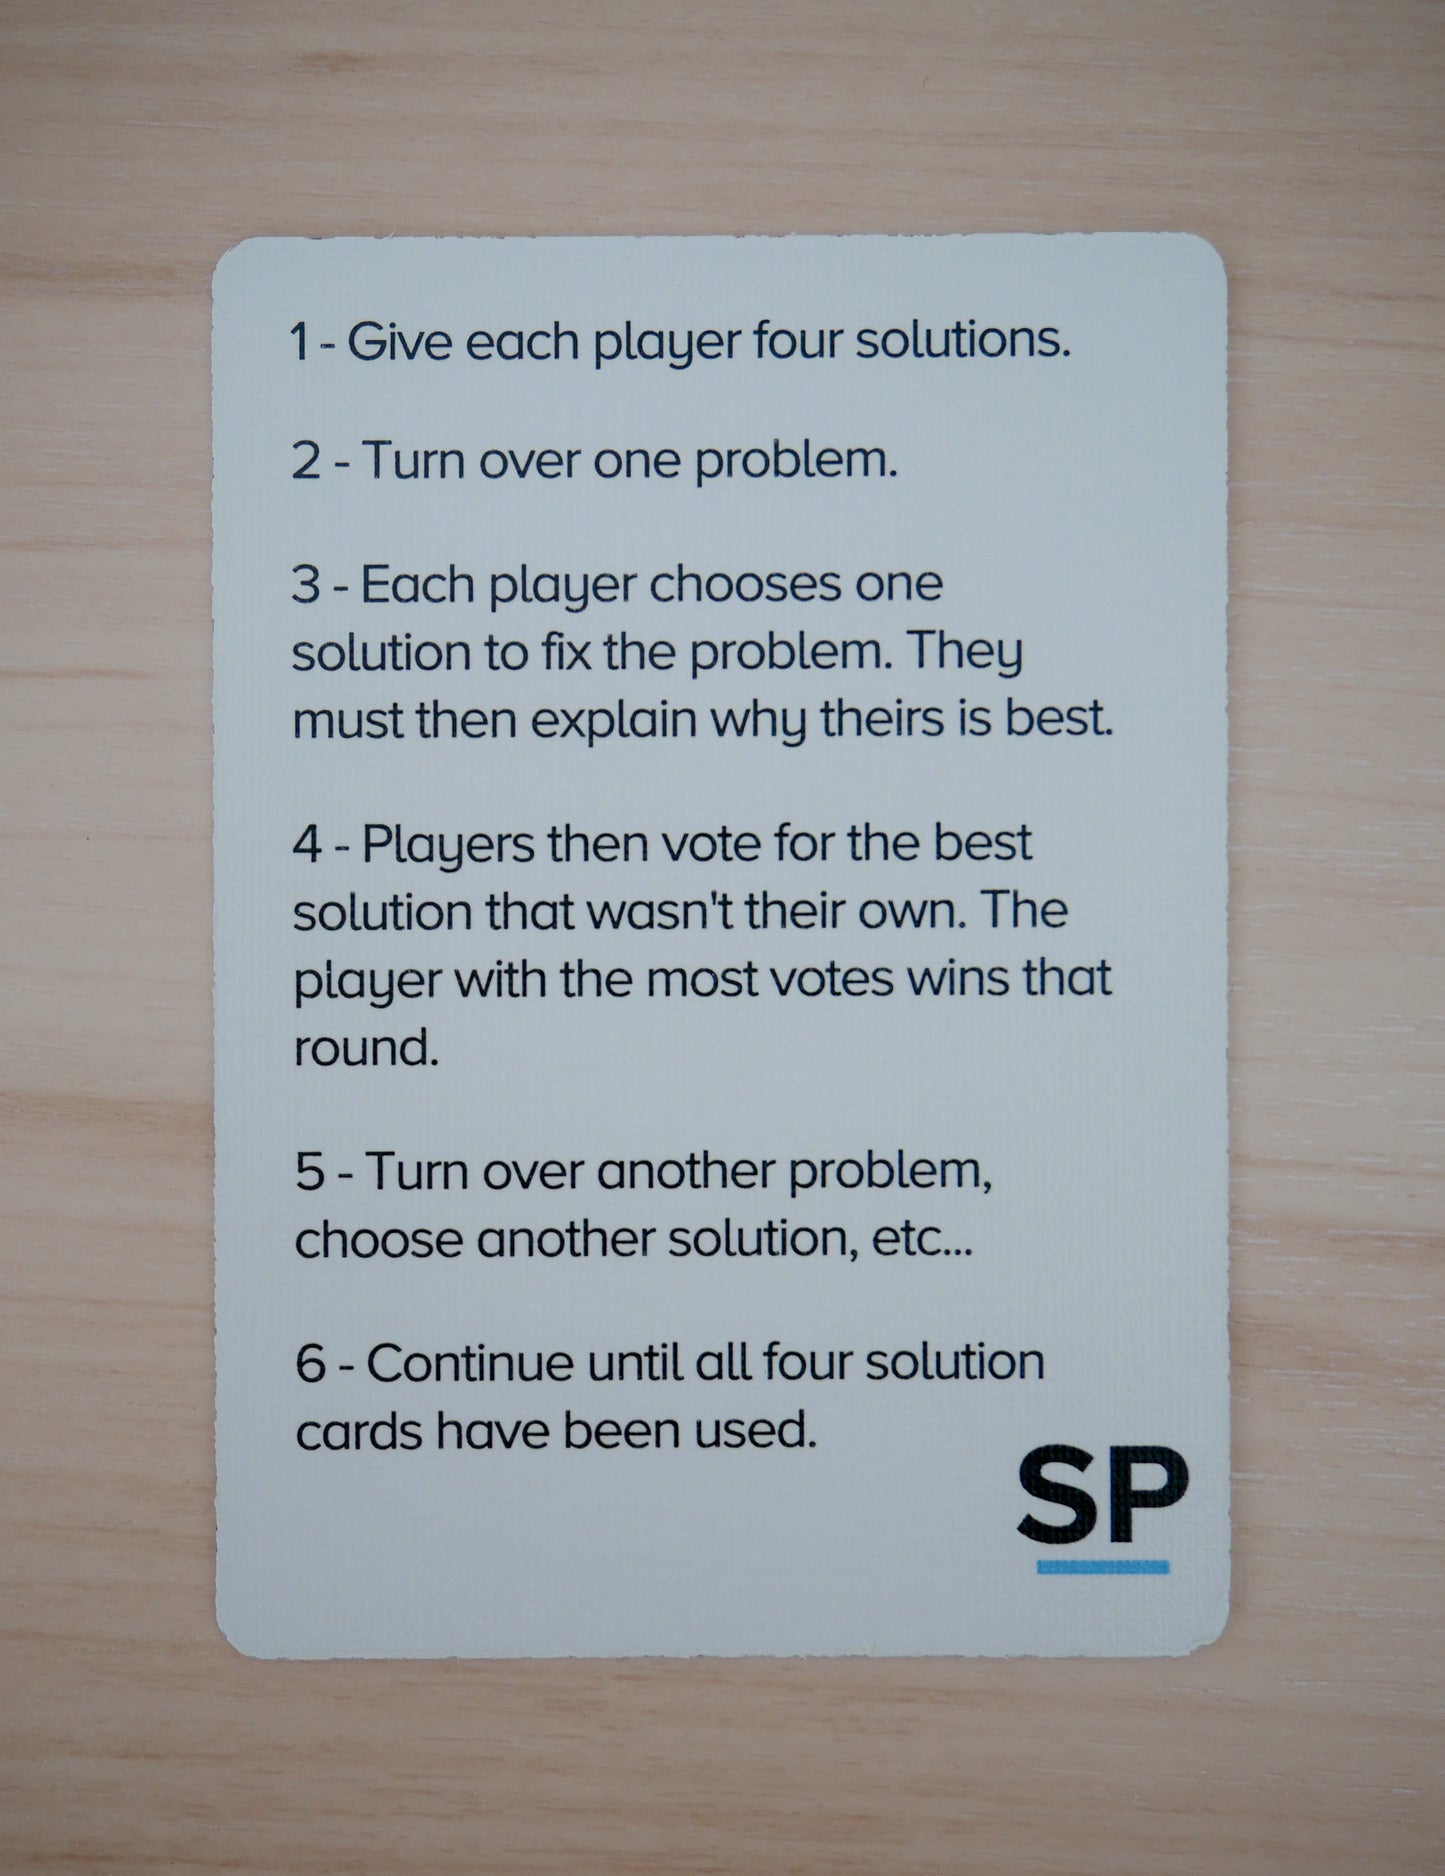 Policy Odyssey: The OG SP card game